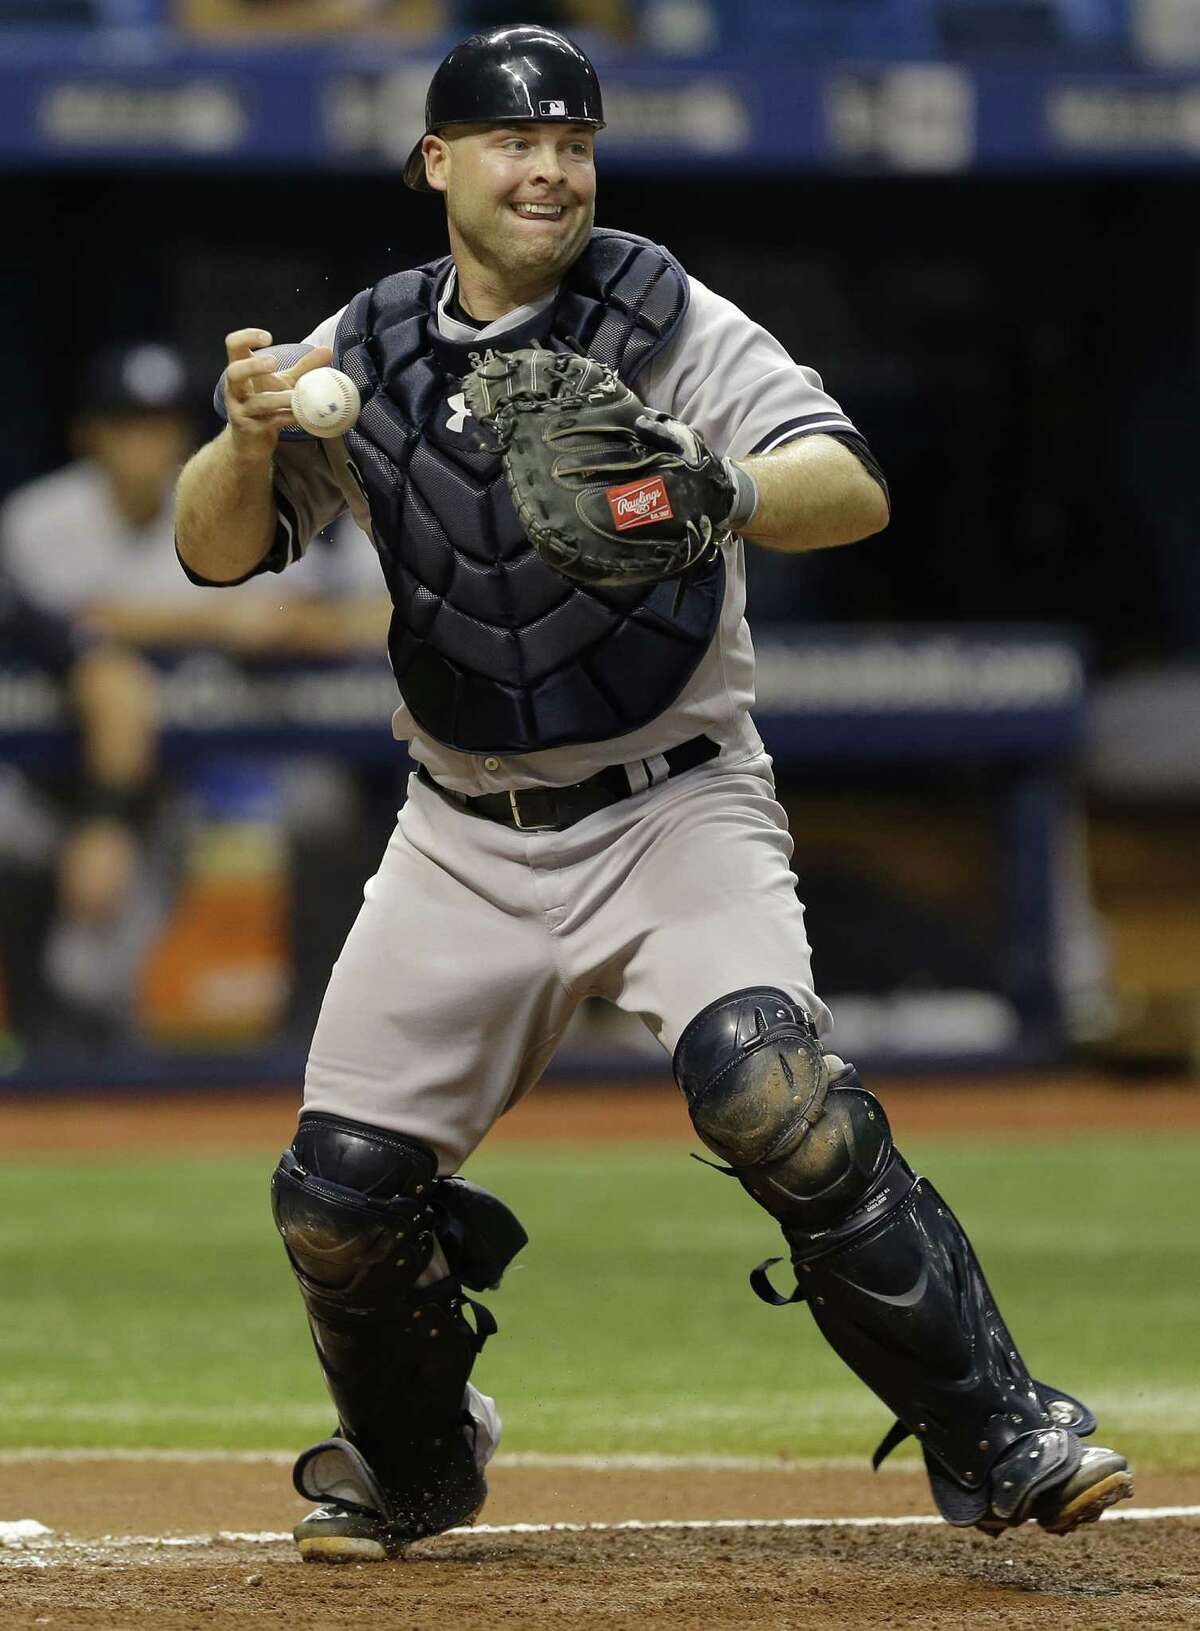 FILE - In this Monday, Sept. 14, 2015 file photo, New York Yankees catcher Brian McCann loses the baseball after forcing Tampa Bay Rays' Asdrubal Cabrera at home plate on a fielder's choice by Kevin Kiermaier during the second inning of a baseball game in St. Petersburg, Fla. The New York Yankees traded veteran catcher Brian McCann and $11 million to the Houston Astros on Thursday, Nov. 17, 2016 for a pair of young minor league pitchers.(AP Photo/Chris O'Meara, File)